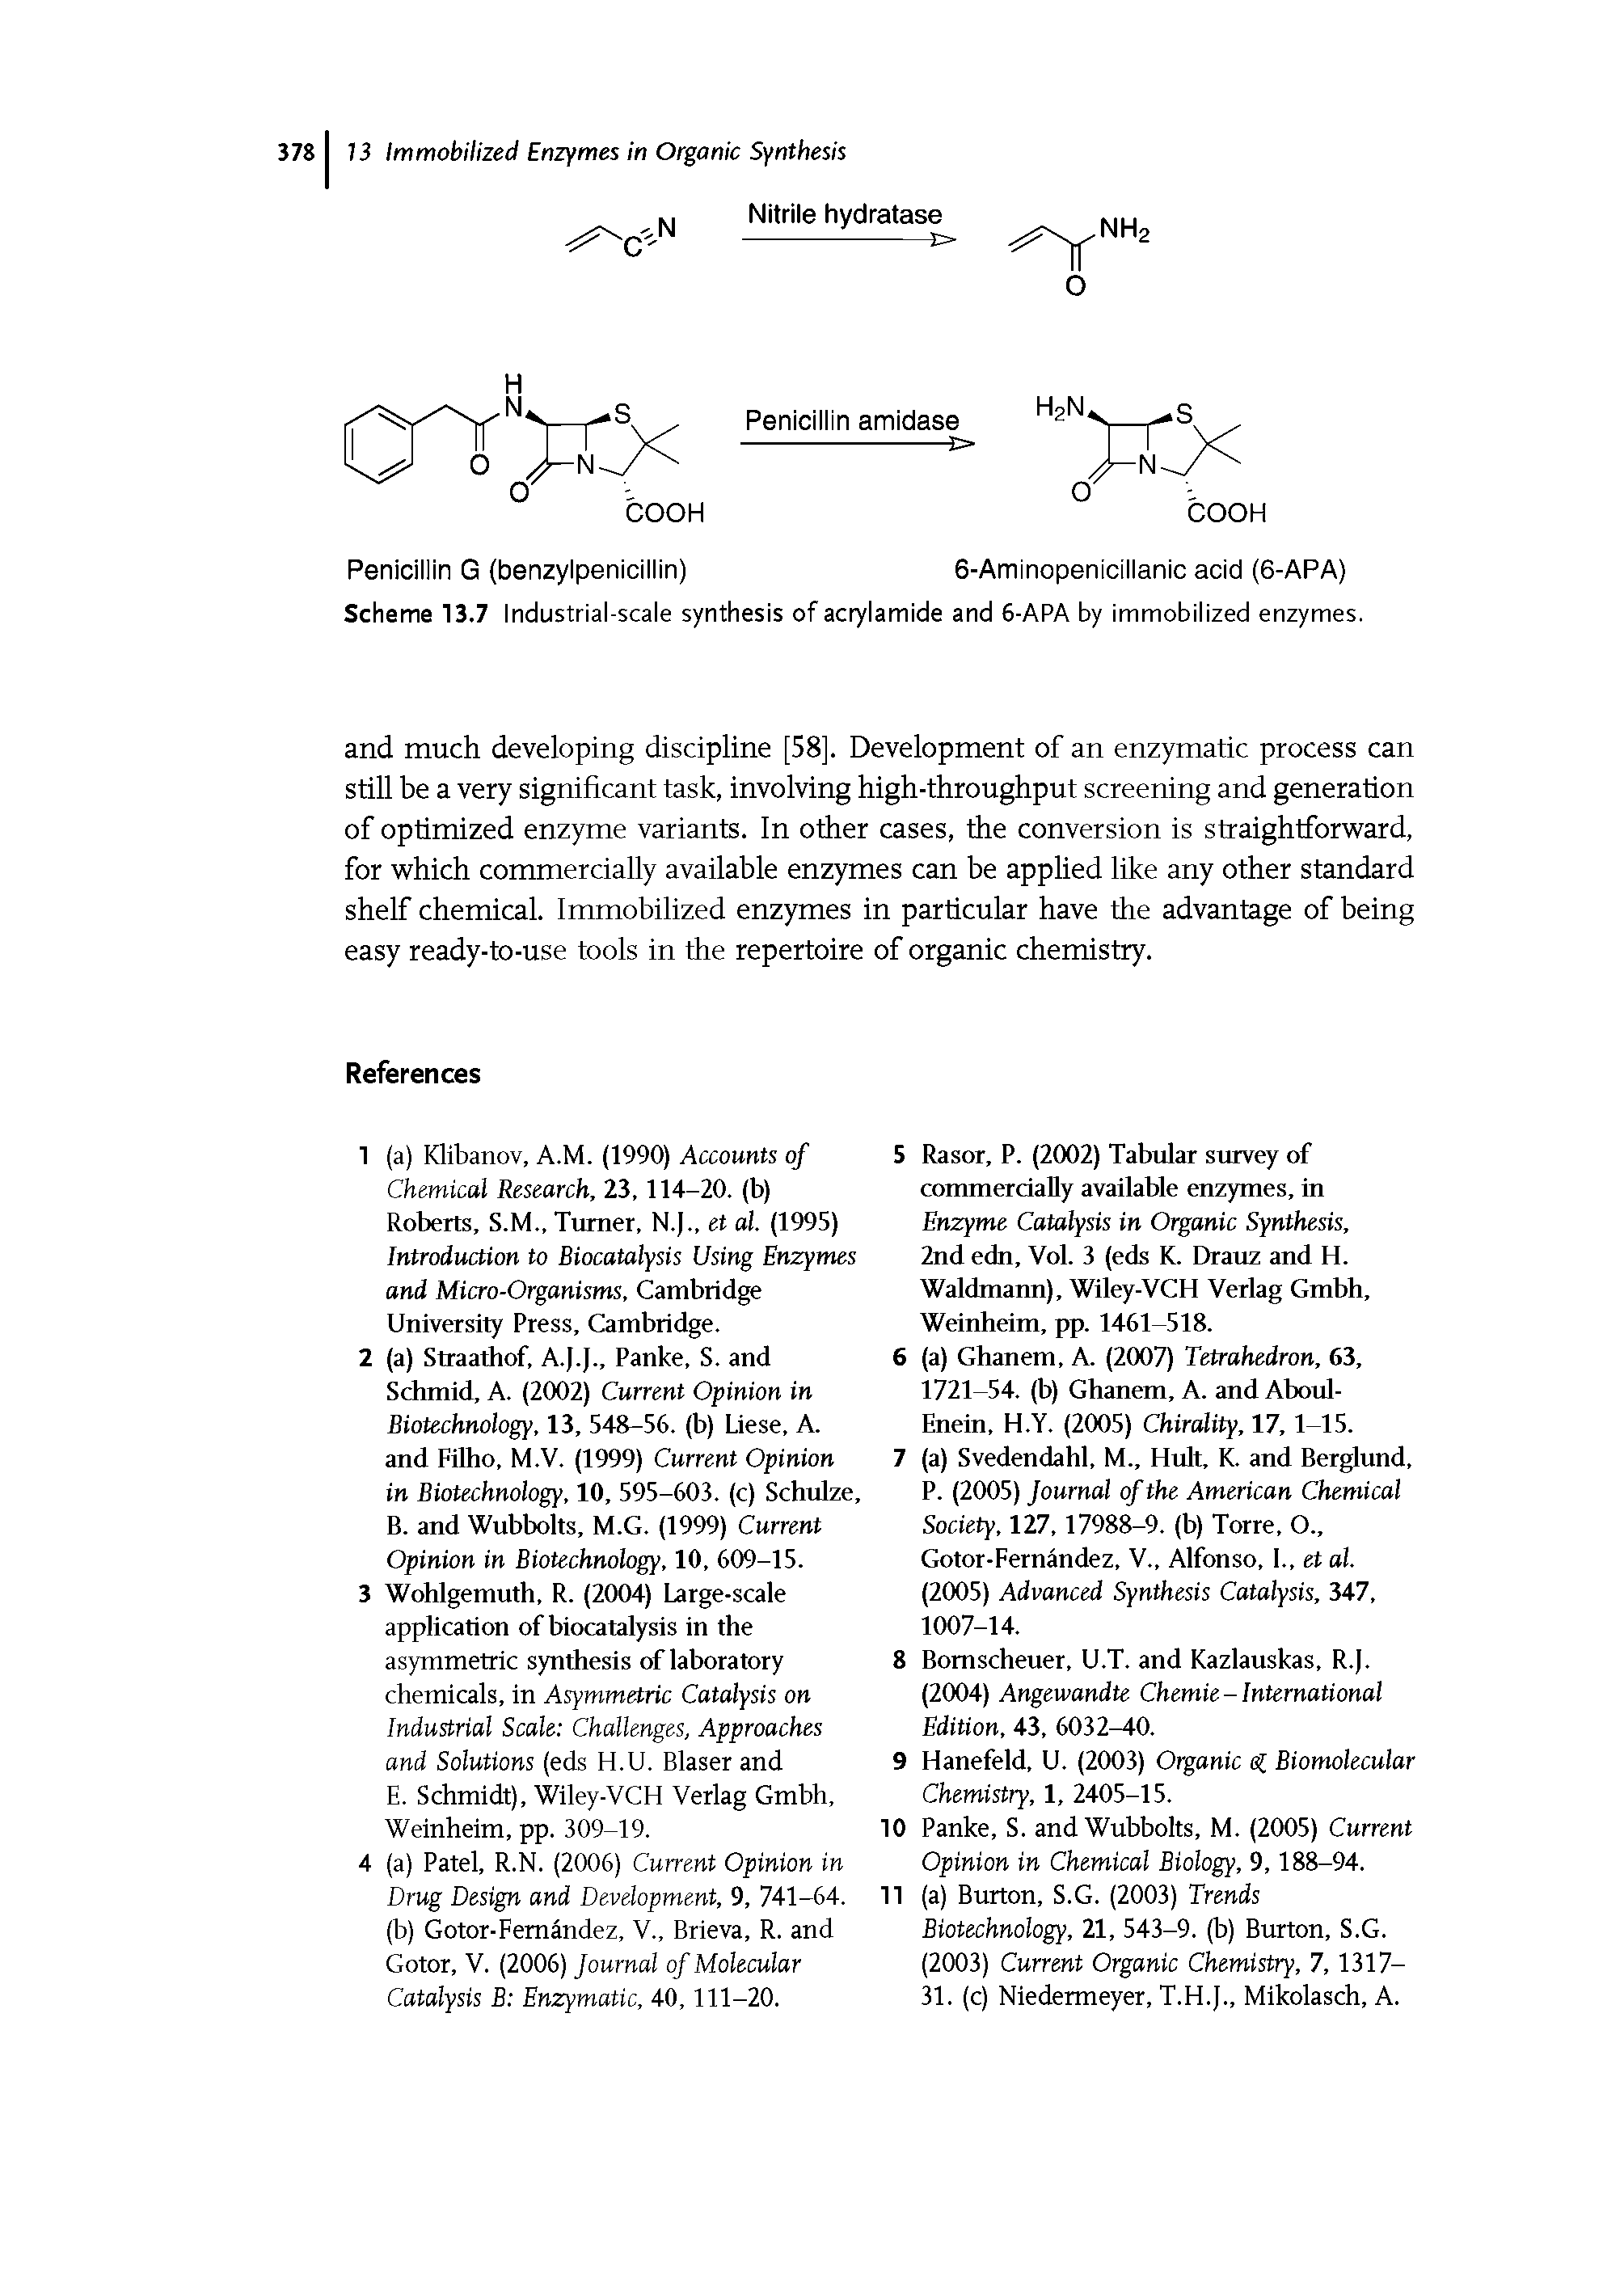 Scheme 13.7 Industrial-scale synthesis of acrylamide and 6-APA by immobilized enzymes.